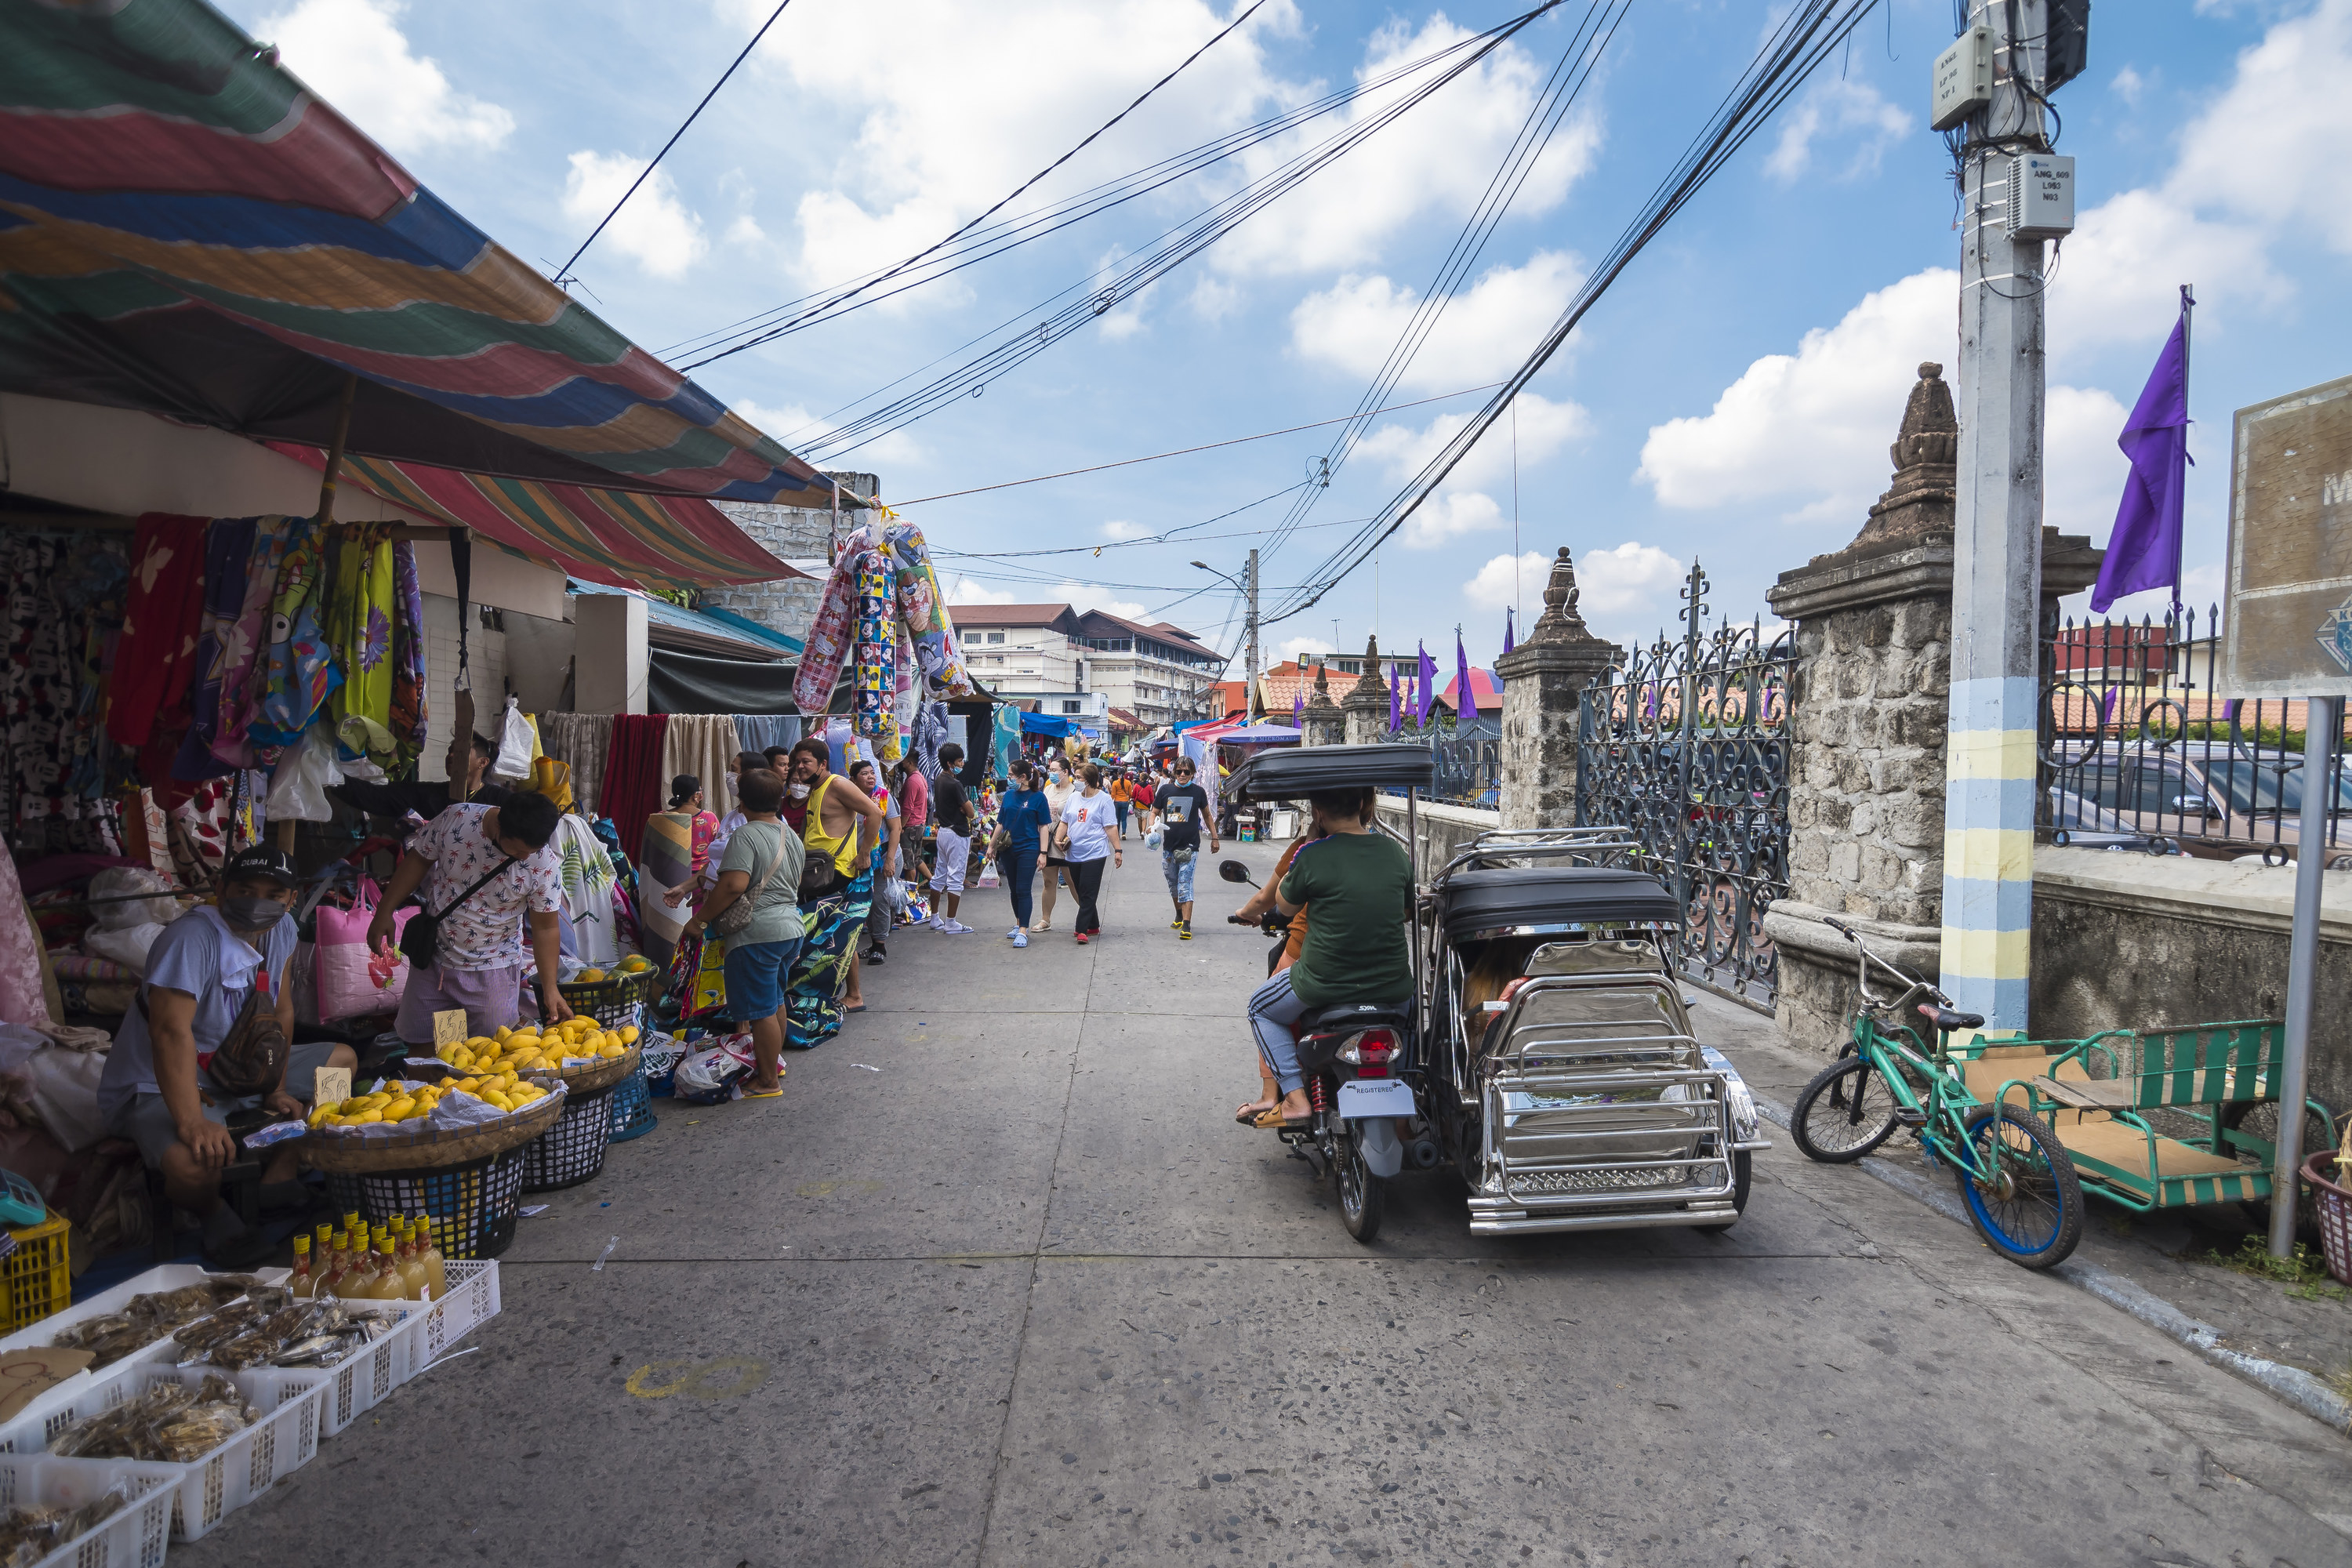 a tricycle passing by the local market scene in the phillippines